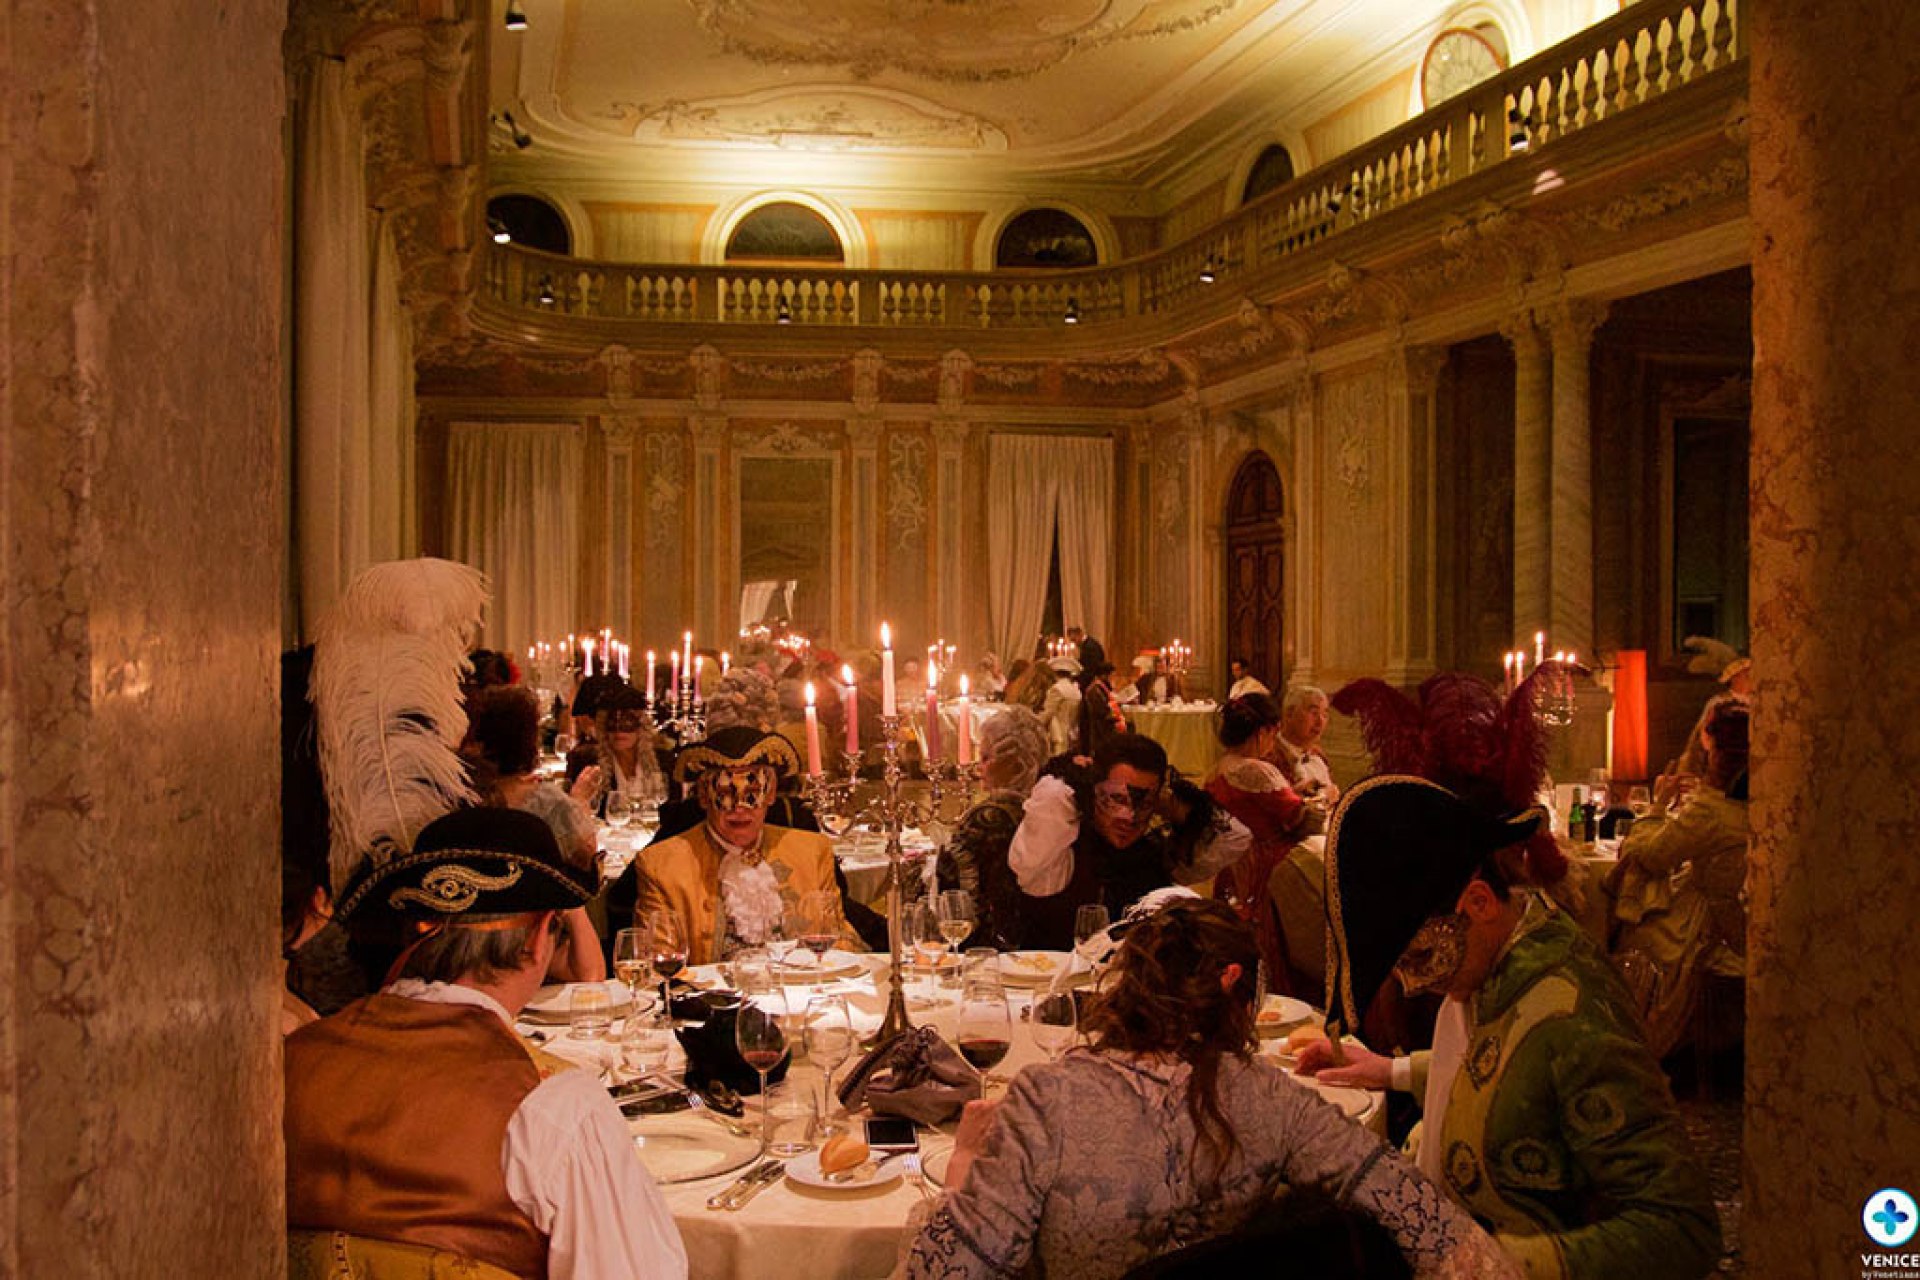 Minuetto 1800s Gala Dinner and Ball  in Venice with music from 1800s